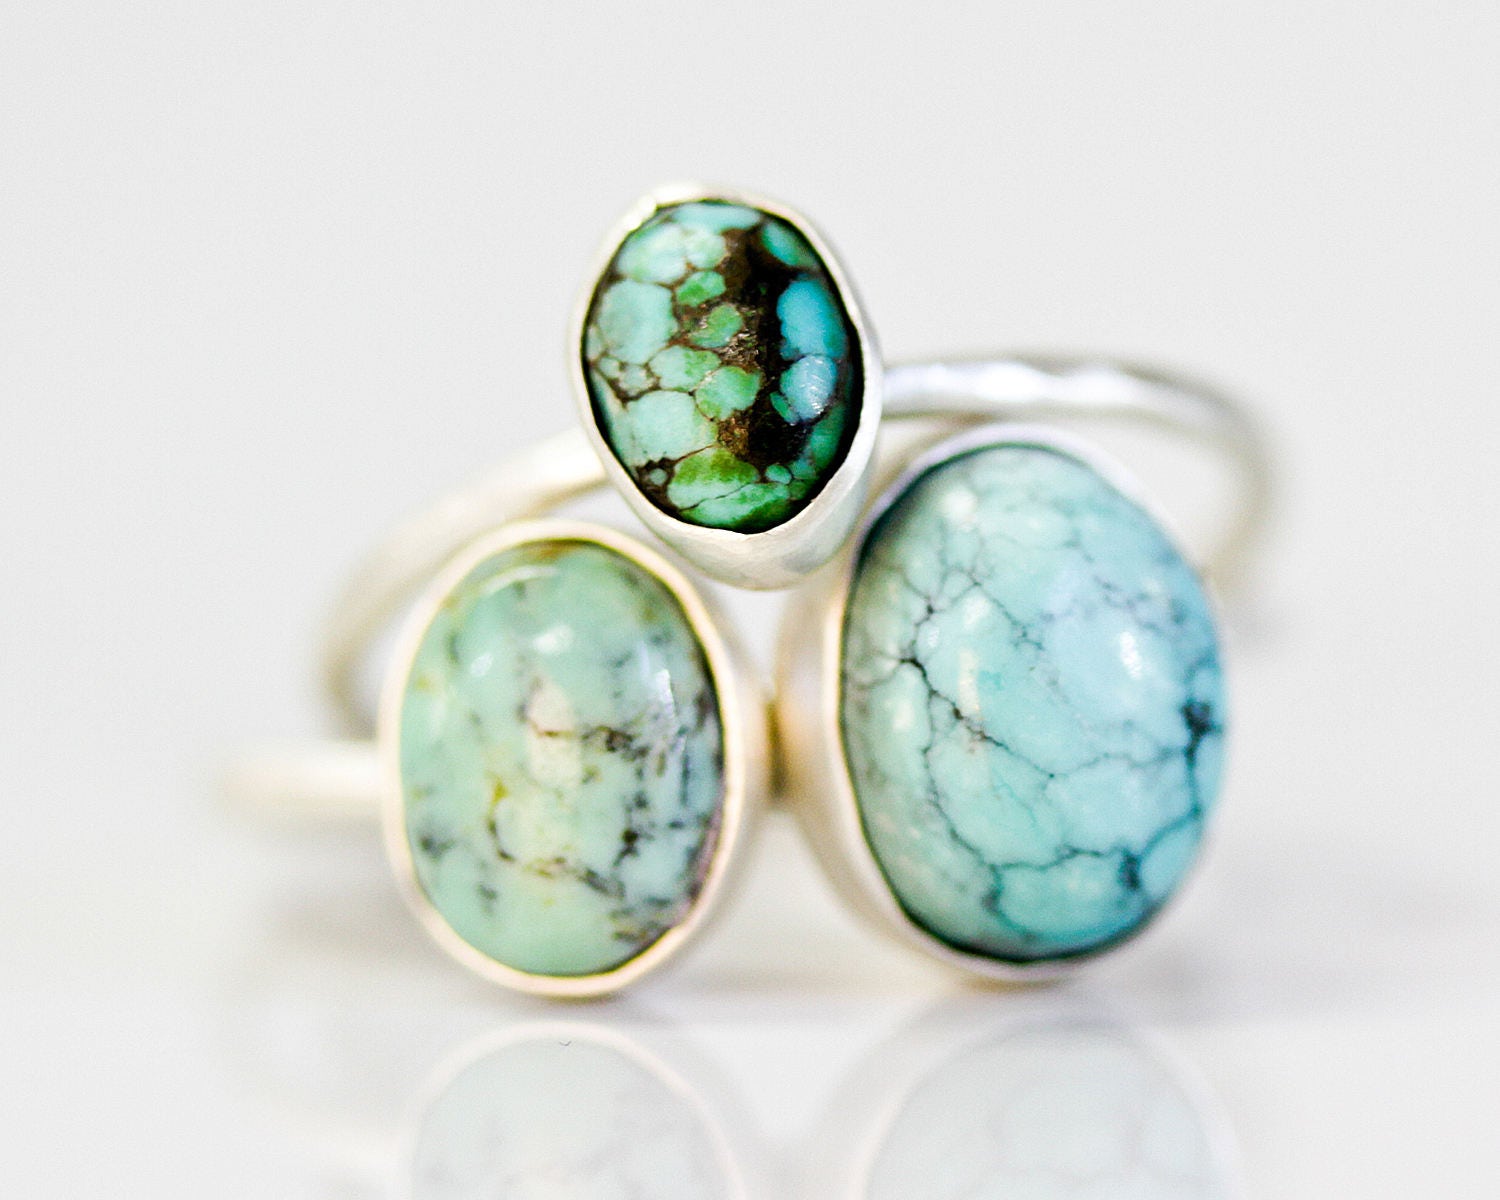 Recycled Sterling Silver Genuine Turquoise Oval Ring / Chic